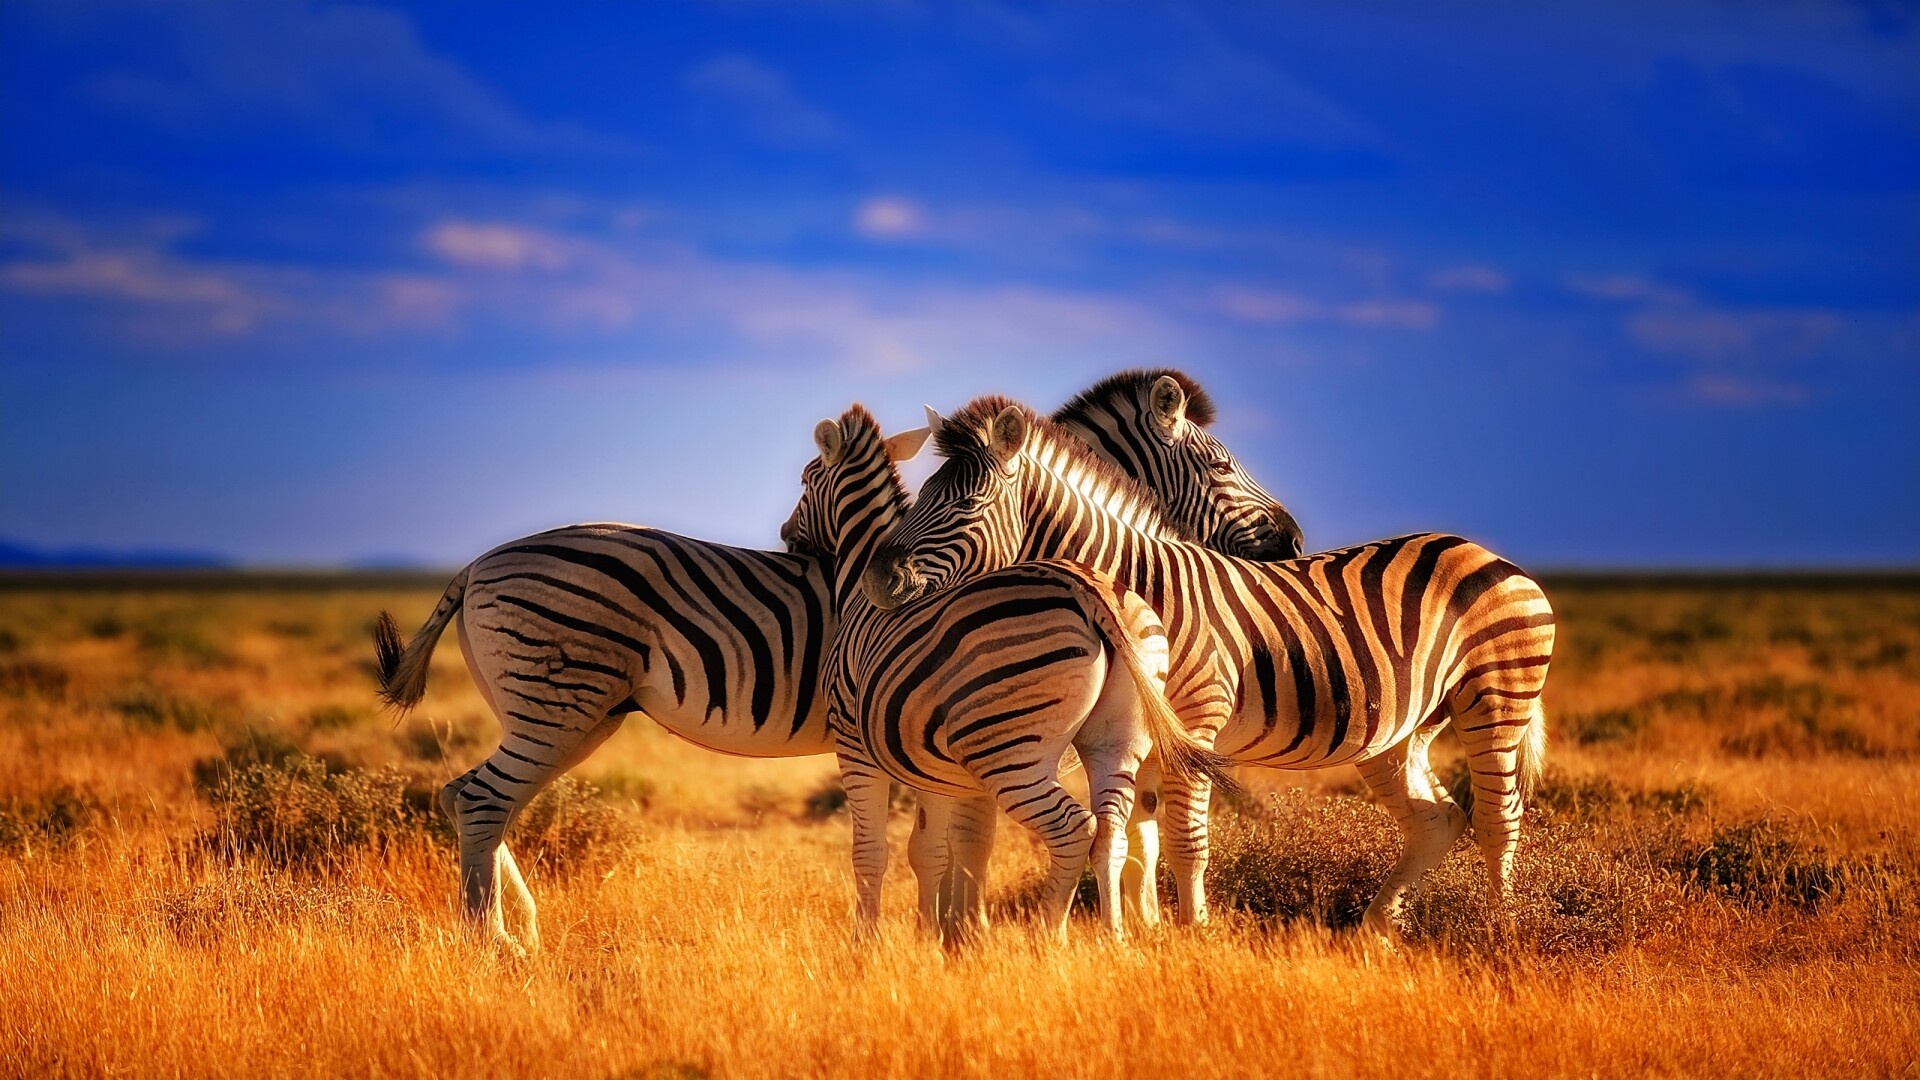 HD and 4K zebra wallpapers, Free images for iPhones and Android, High-quality PC and mobile backgrounds, Stunning zebra imagery, 1920x1080 Full HD Desktop